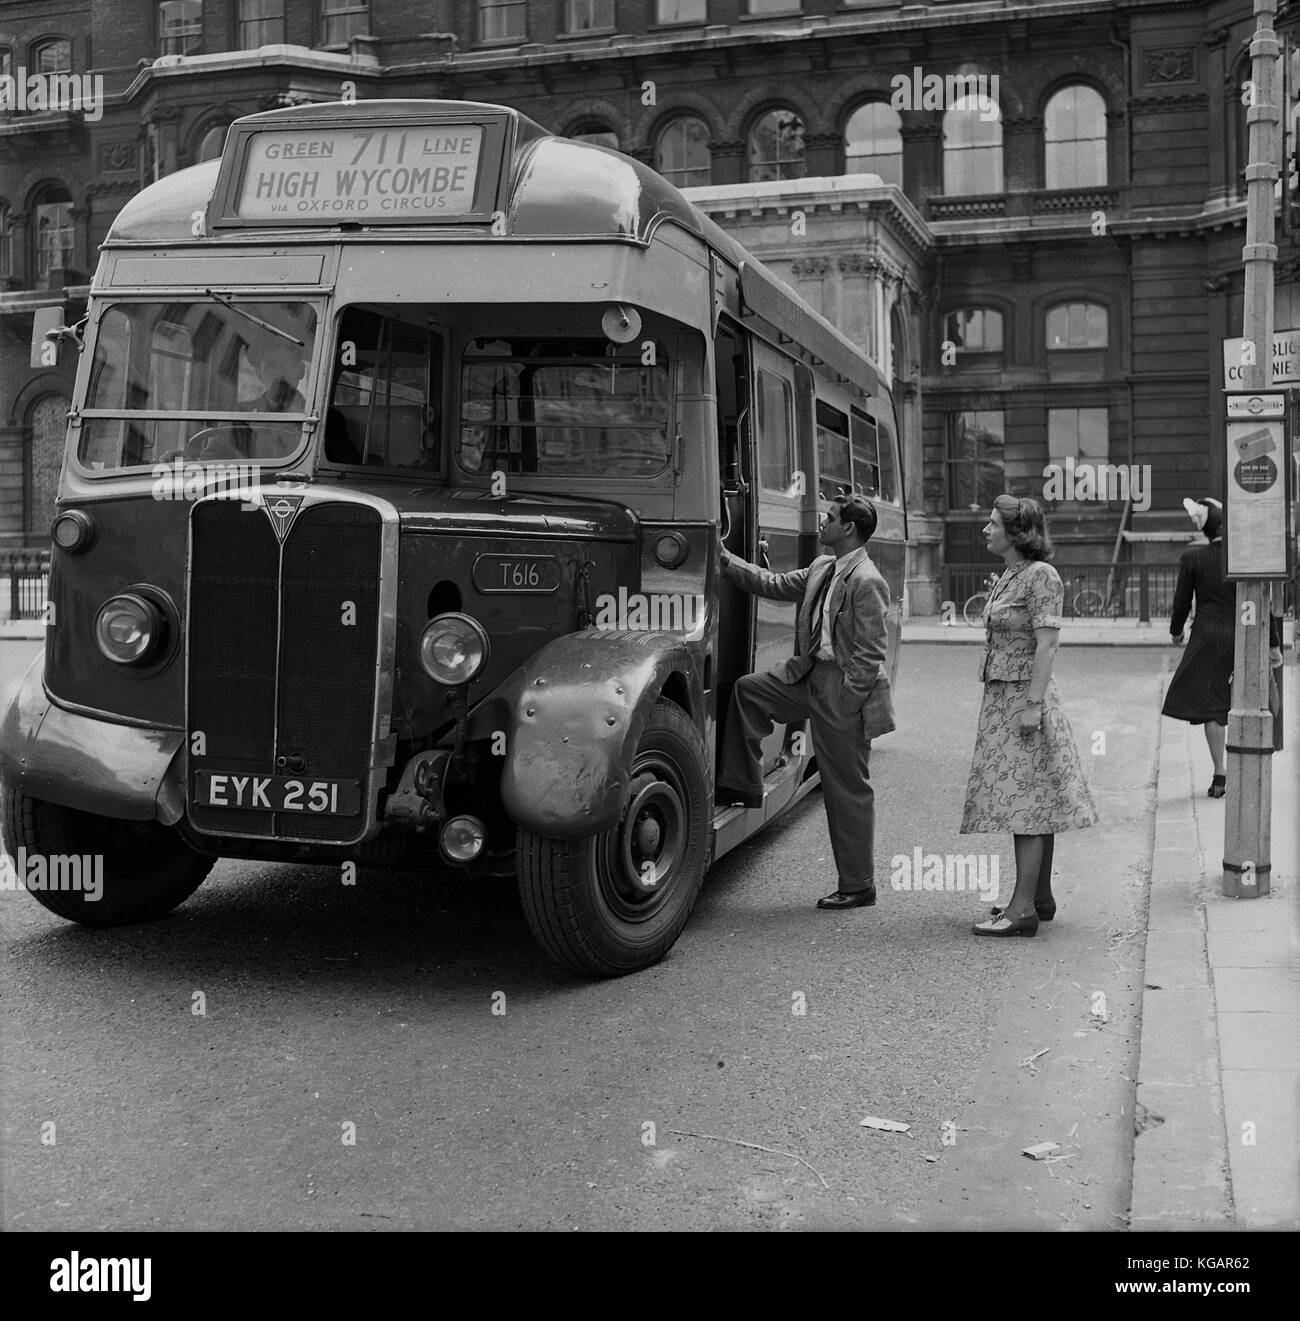 1950s, historical picture showing an overseas gentleman and a lady behind him at Charing Cross, Central London waiting to board the 711 Green Line bus, via Oxford Circus, to the county town of High Wycombe in Buckinghamshire, England, UK. Stock Photo